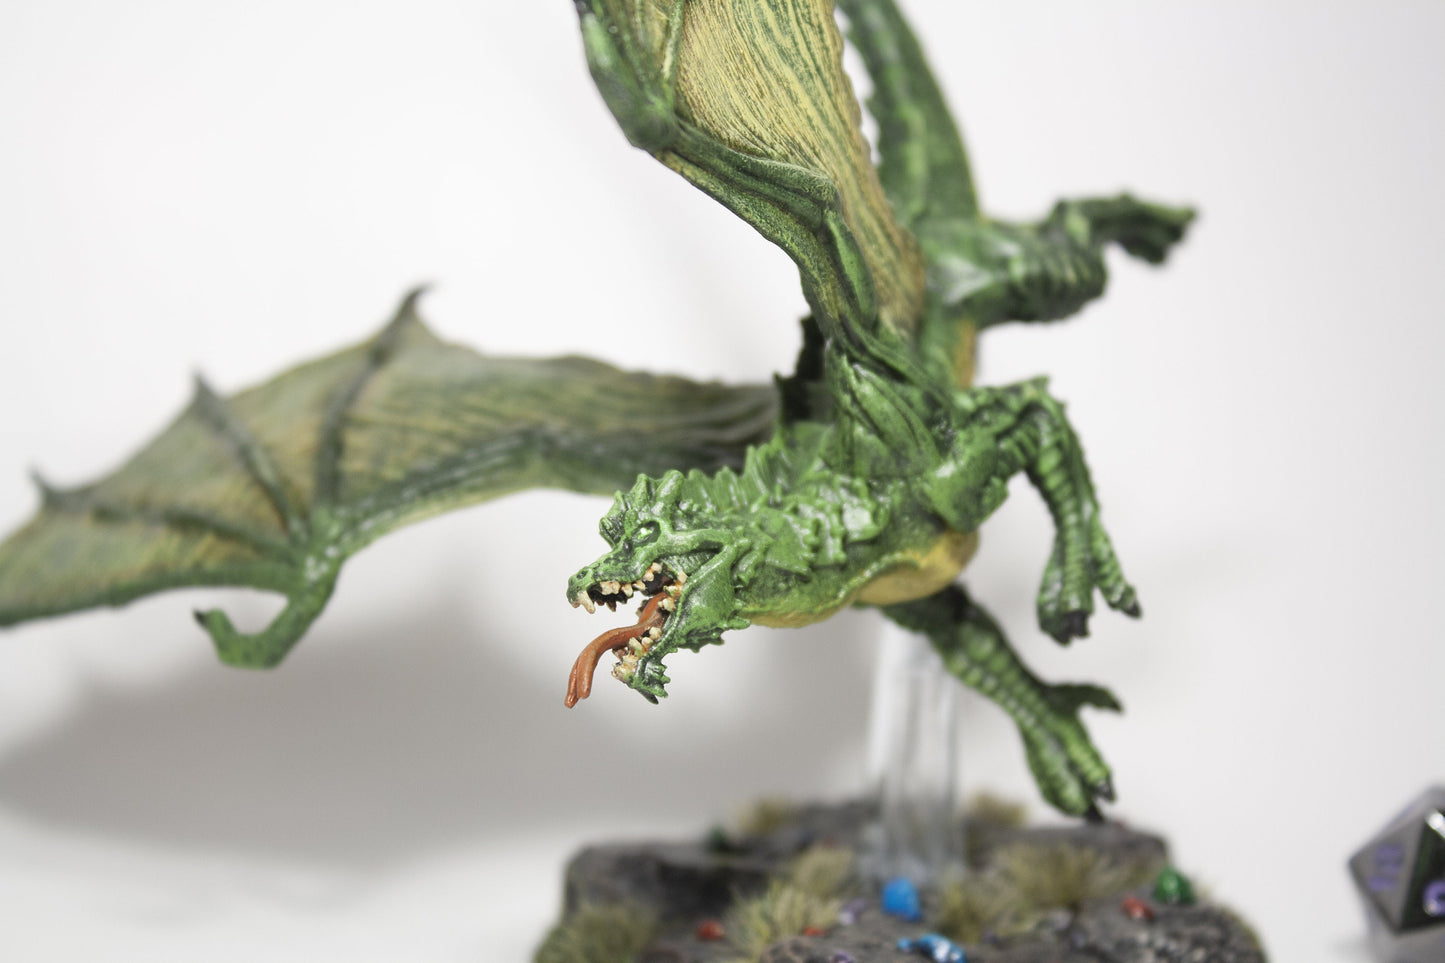 Young Green Dragon High Quality Painted D&D Mini